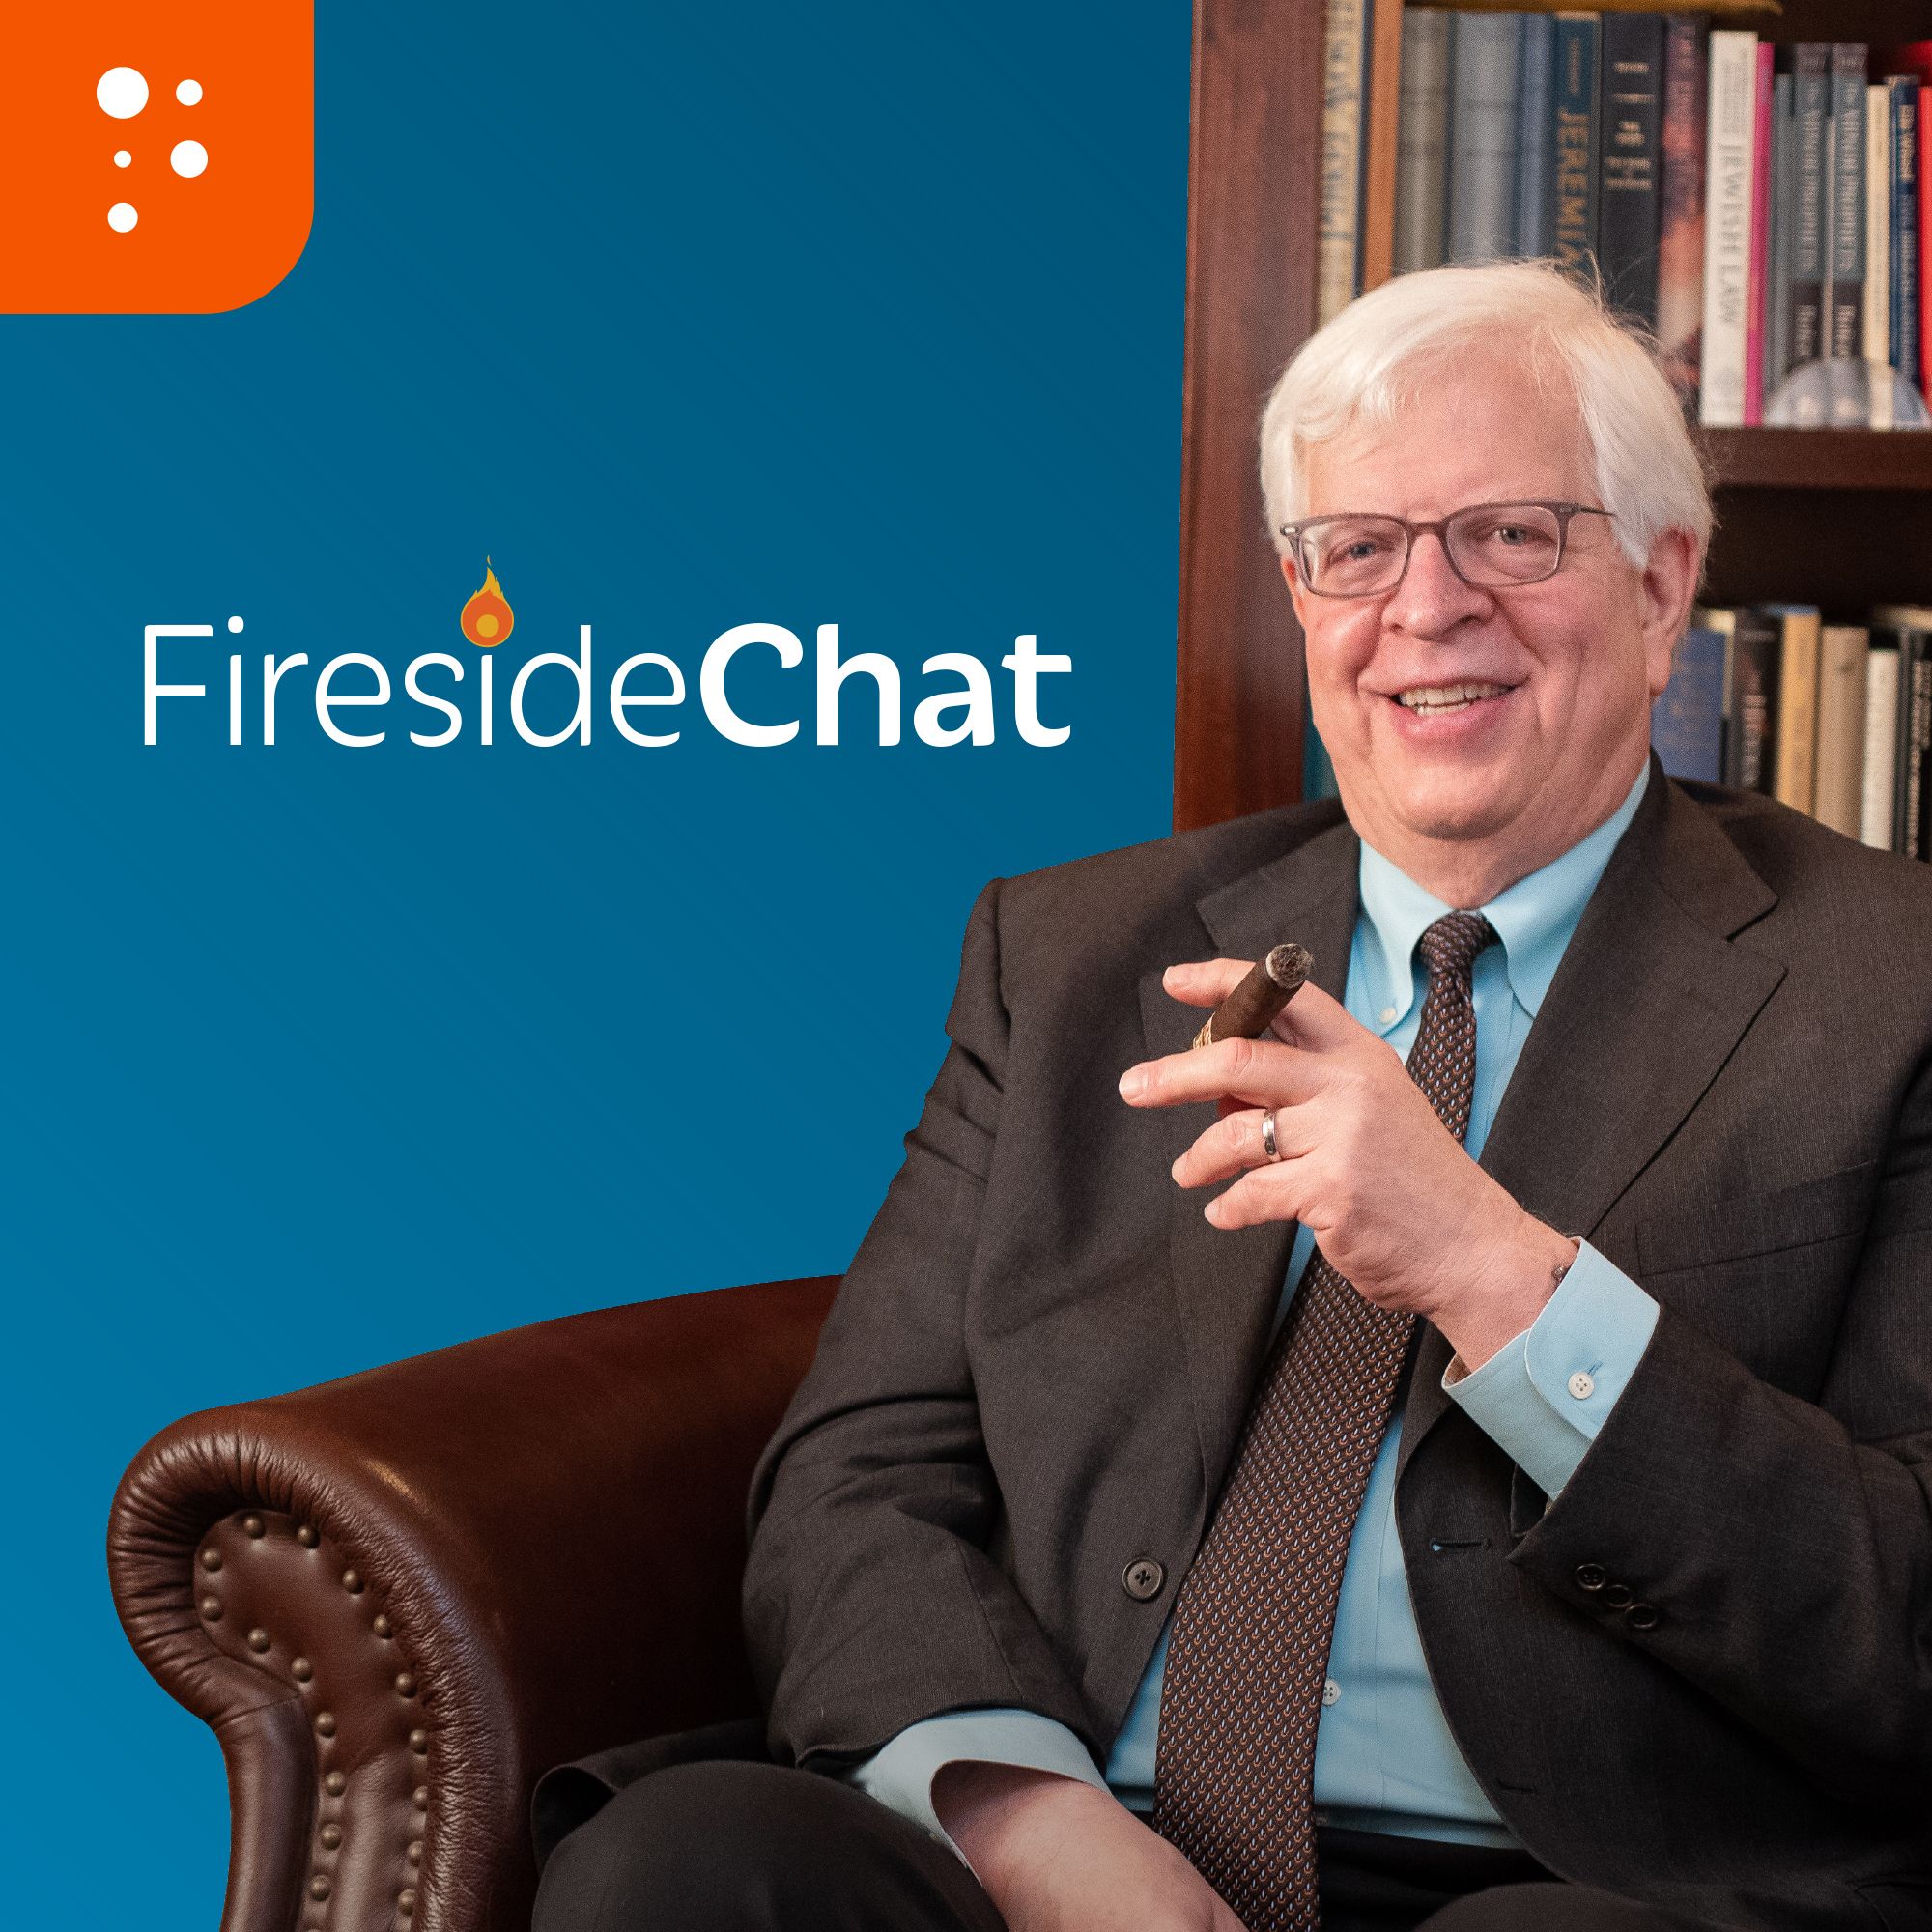 Fireside Chat with Dennis Prager